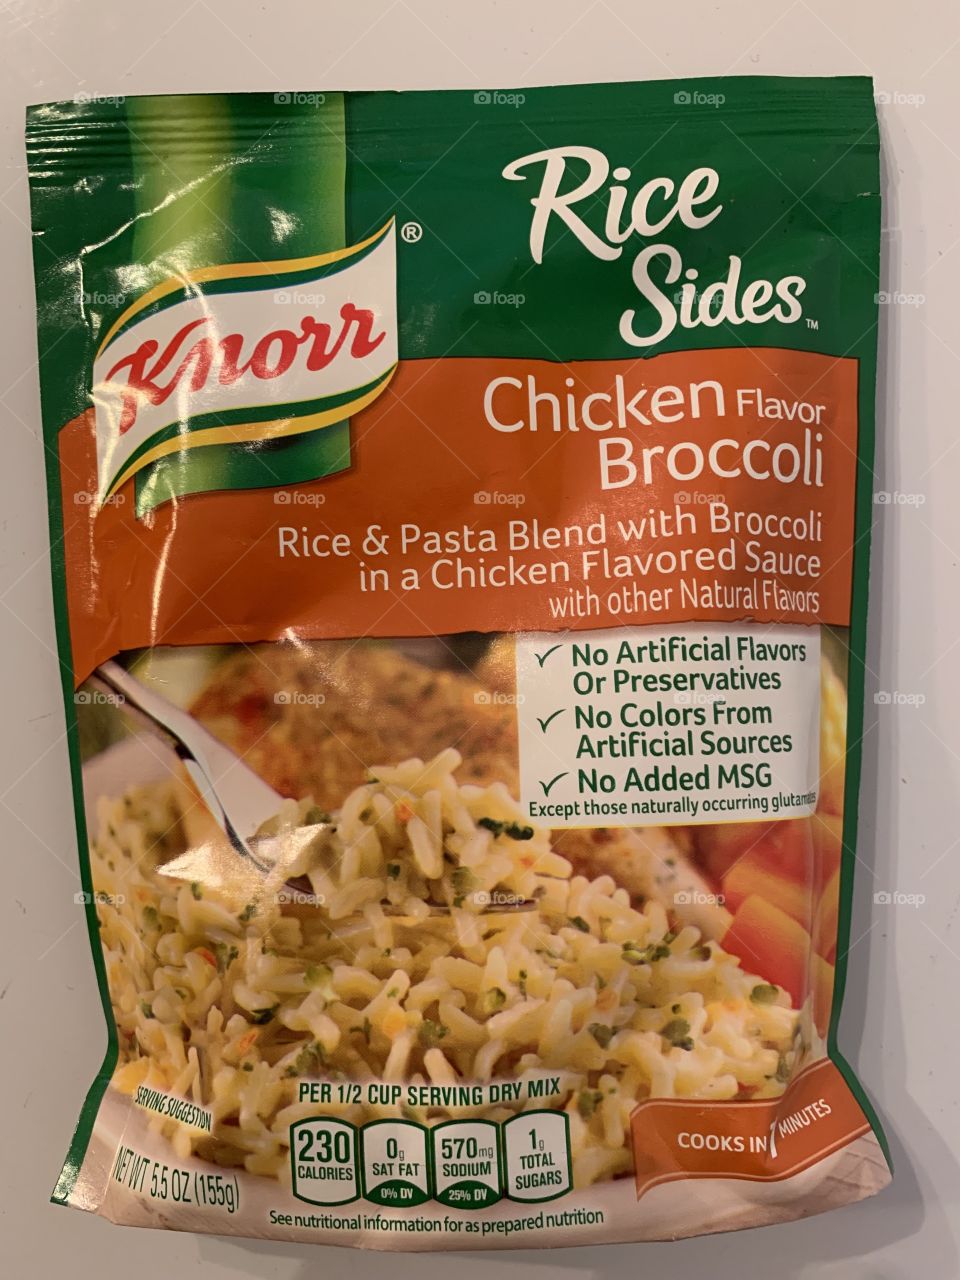 MORE KNORR PLEASE! THIS RICE IS NICE! 